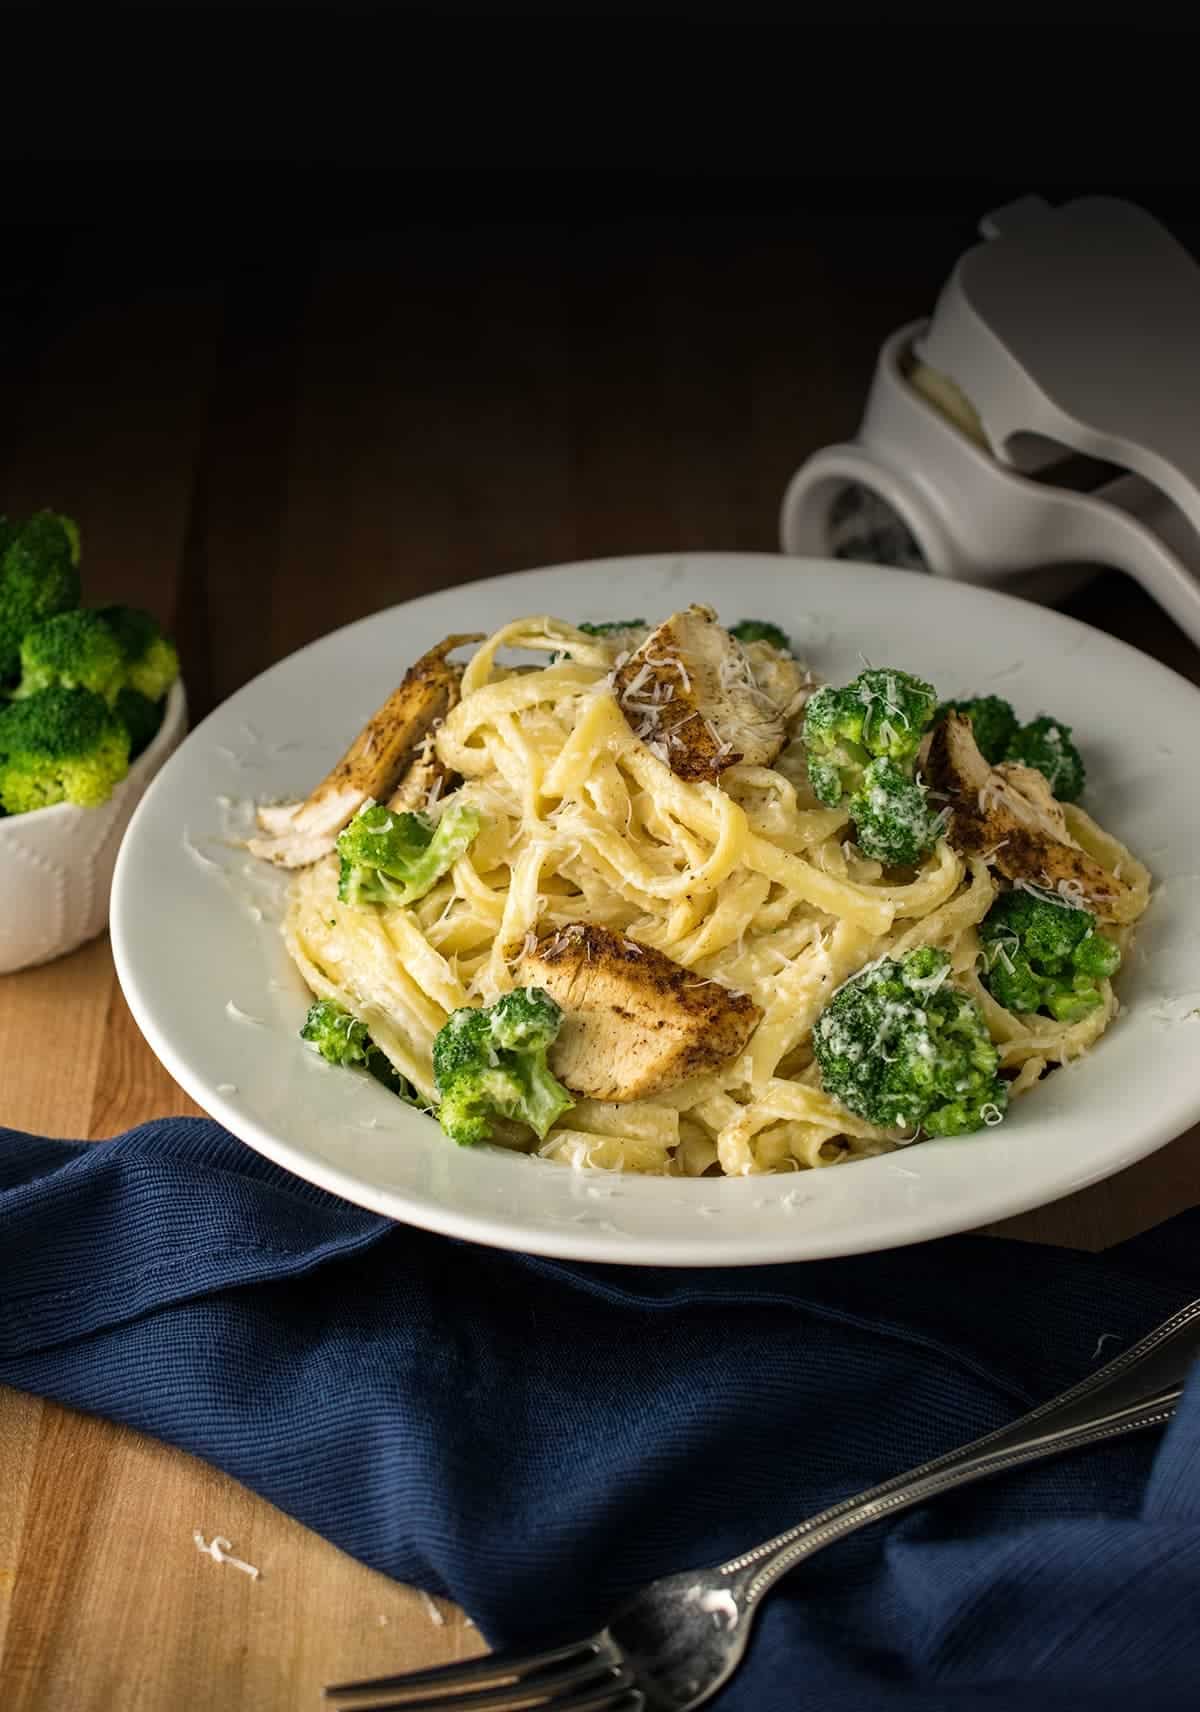 Alfredo pasta with broccoli and cut up blackened chicken in a white bowl.